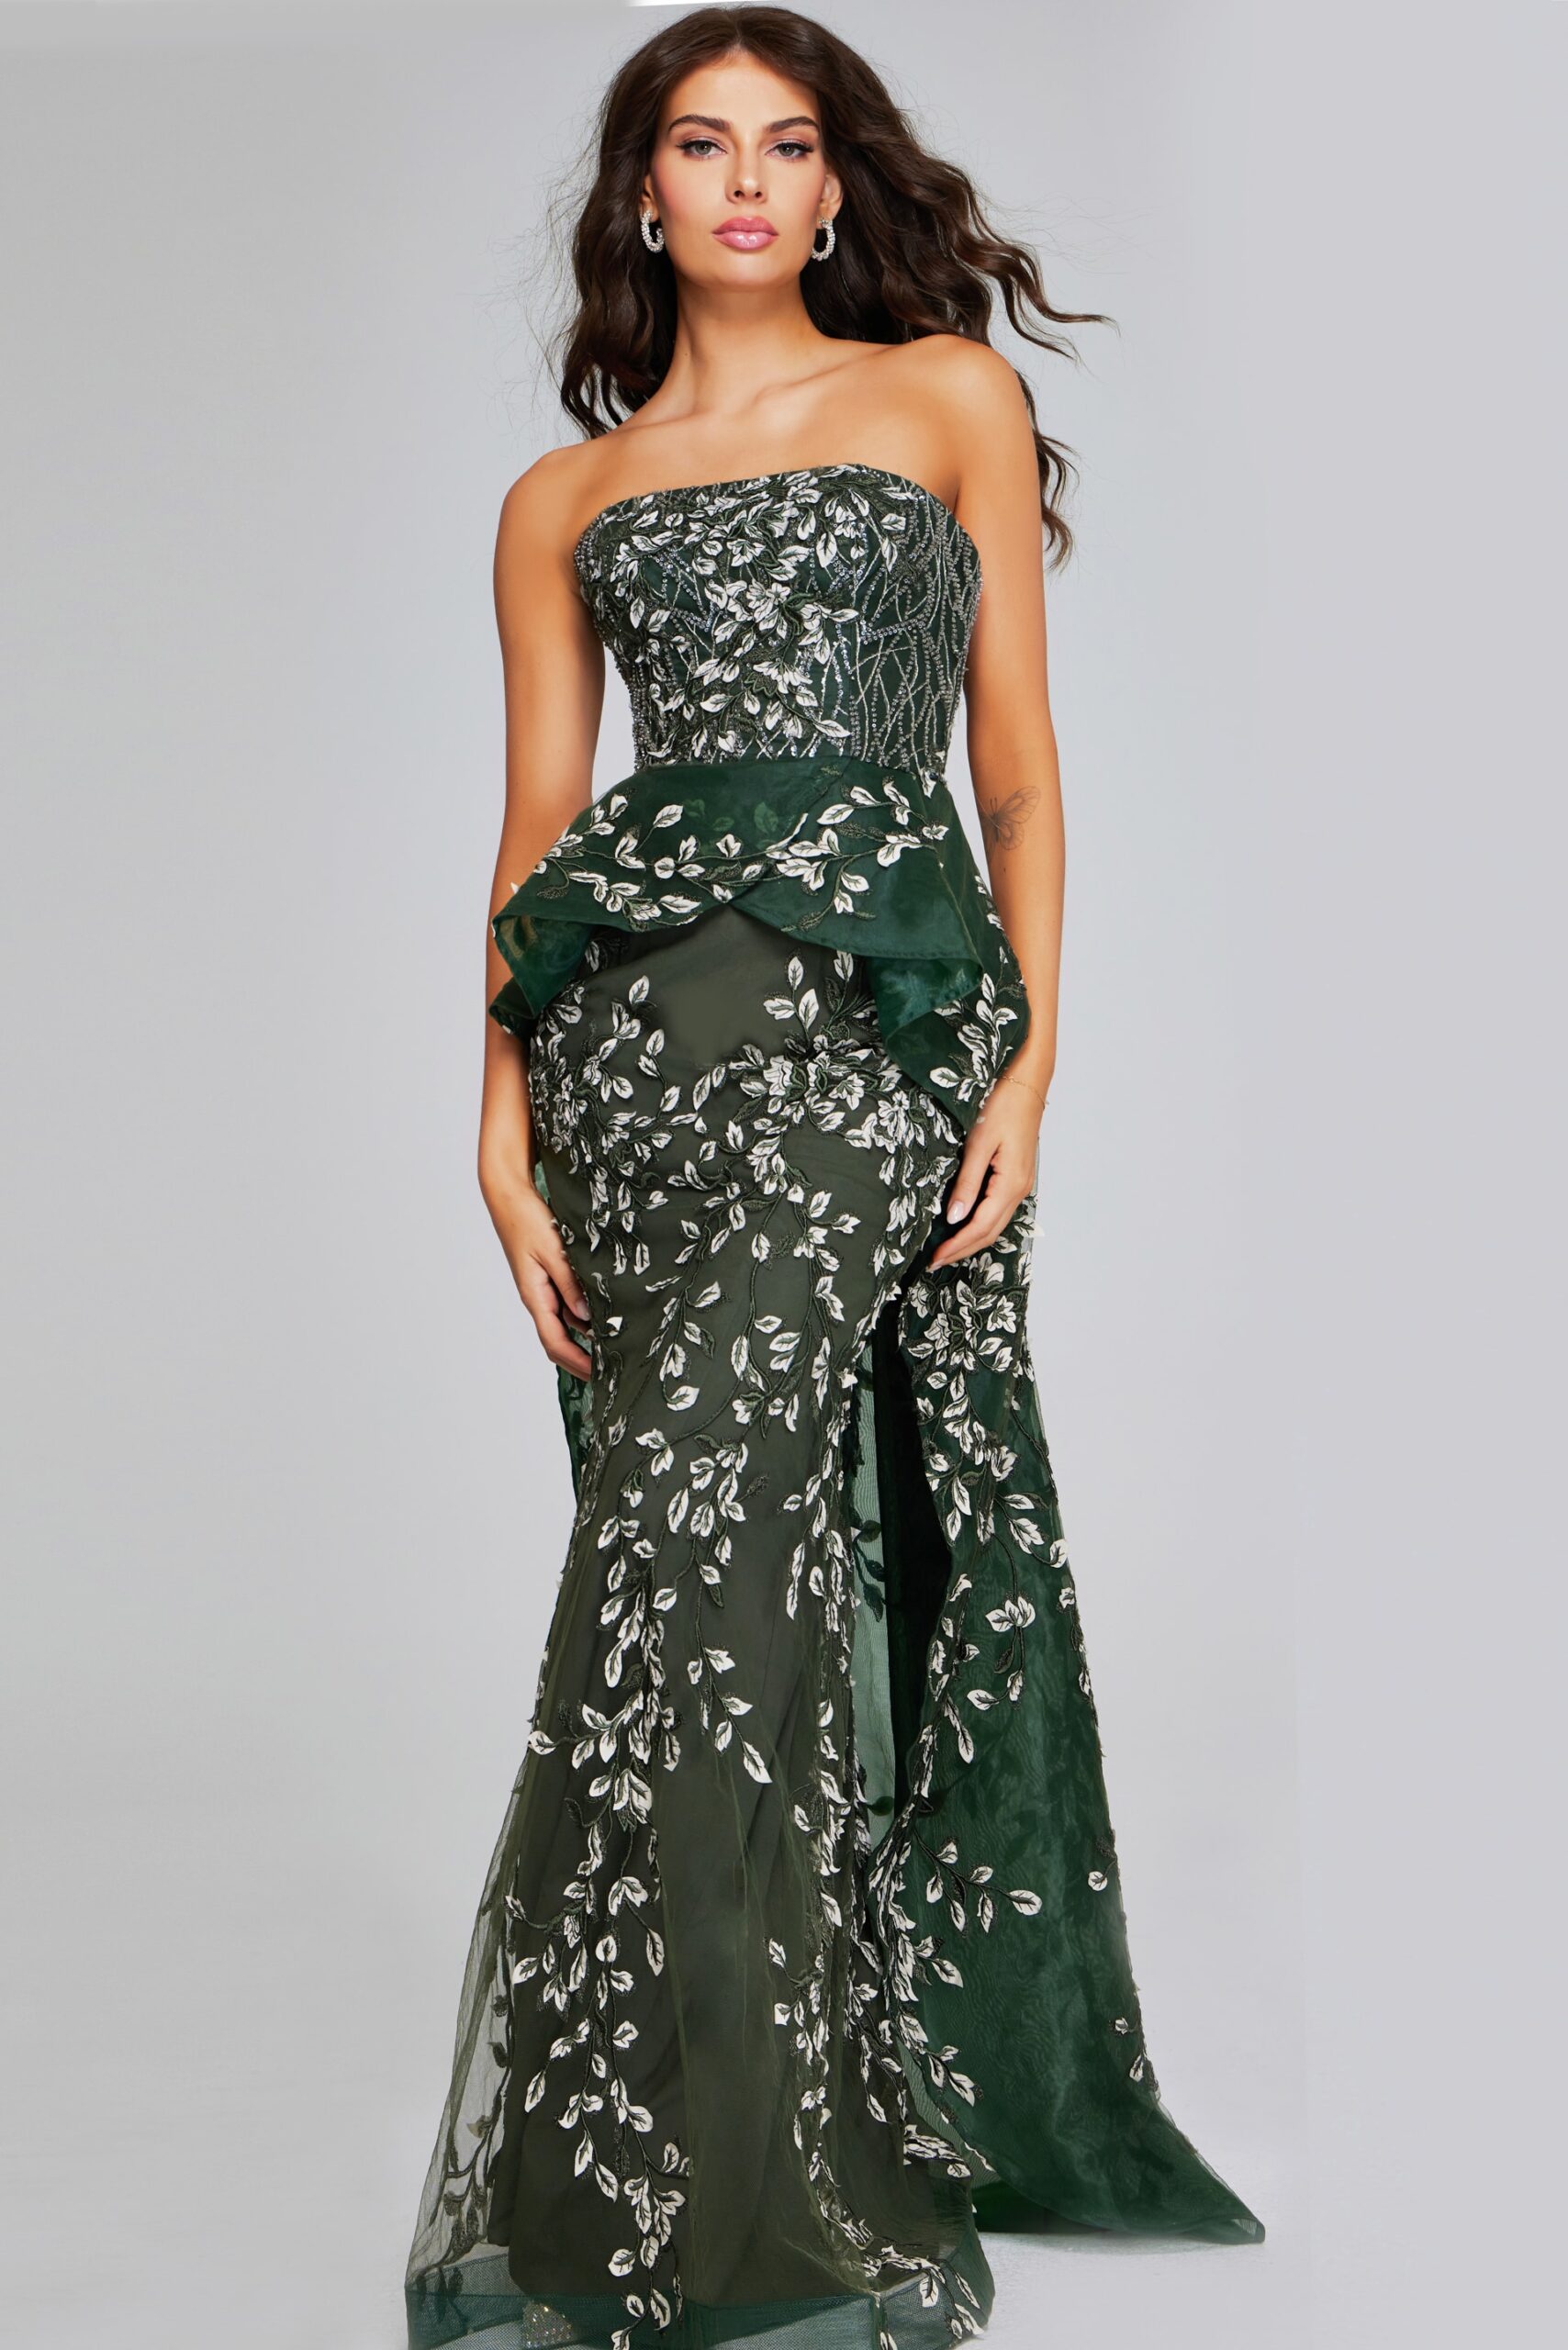 Model wearing Dark Green Strapless Gown with Embroidered Floral Design 37599